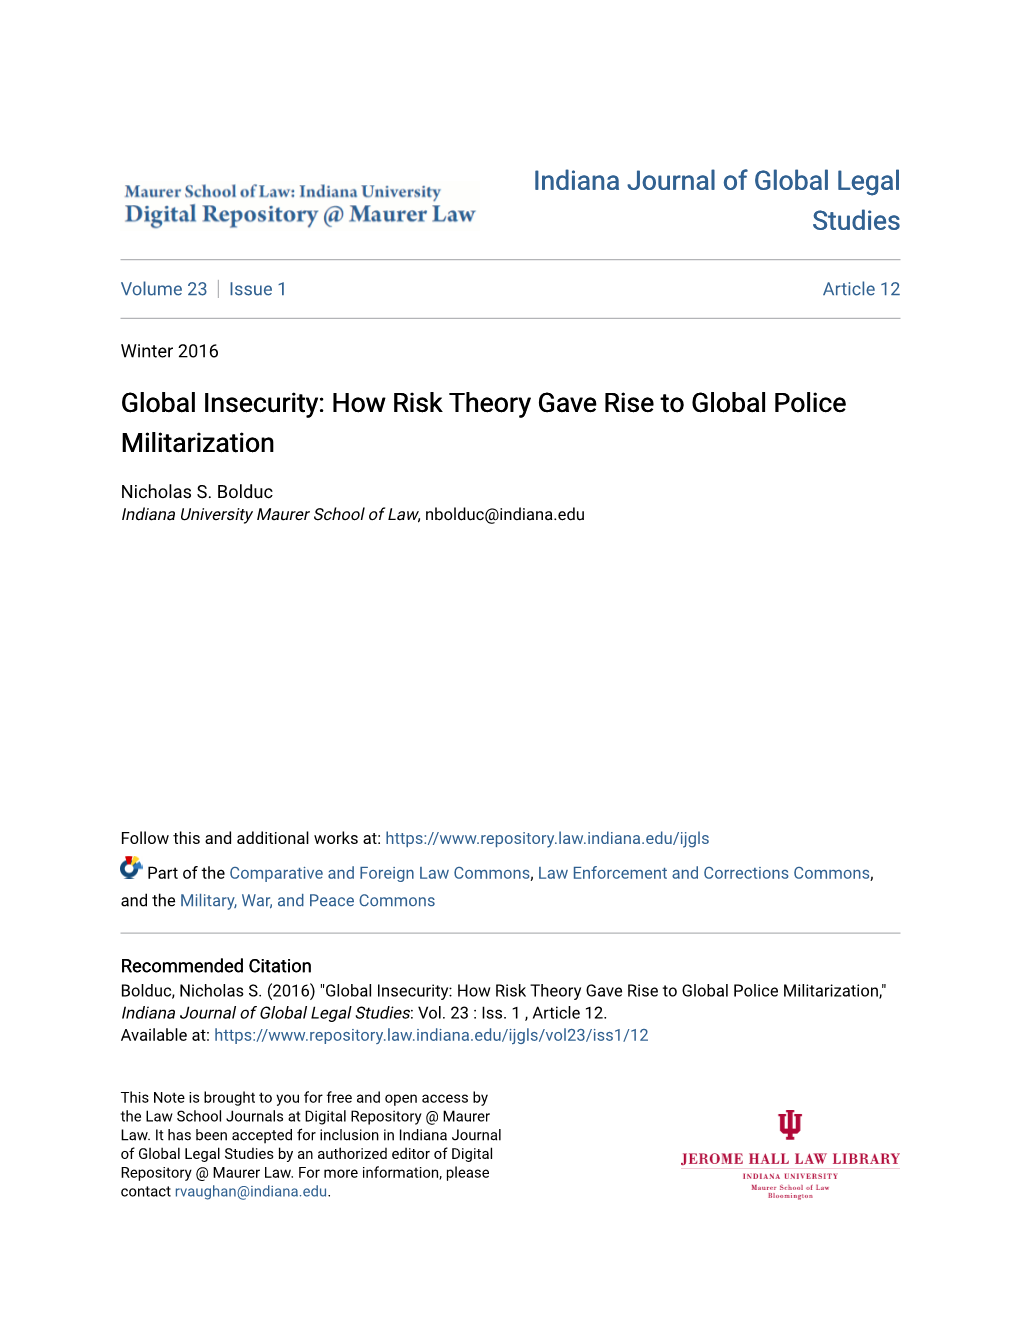 How Risk Theory Gave Rise to Global Police Militarization